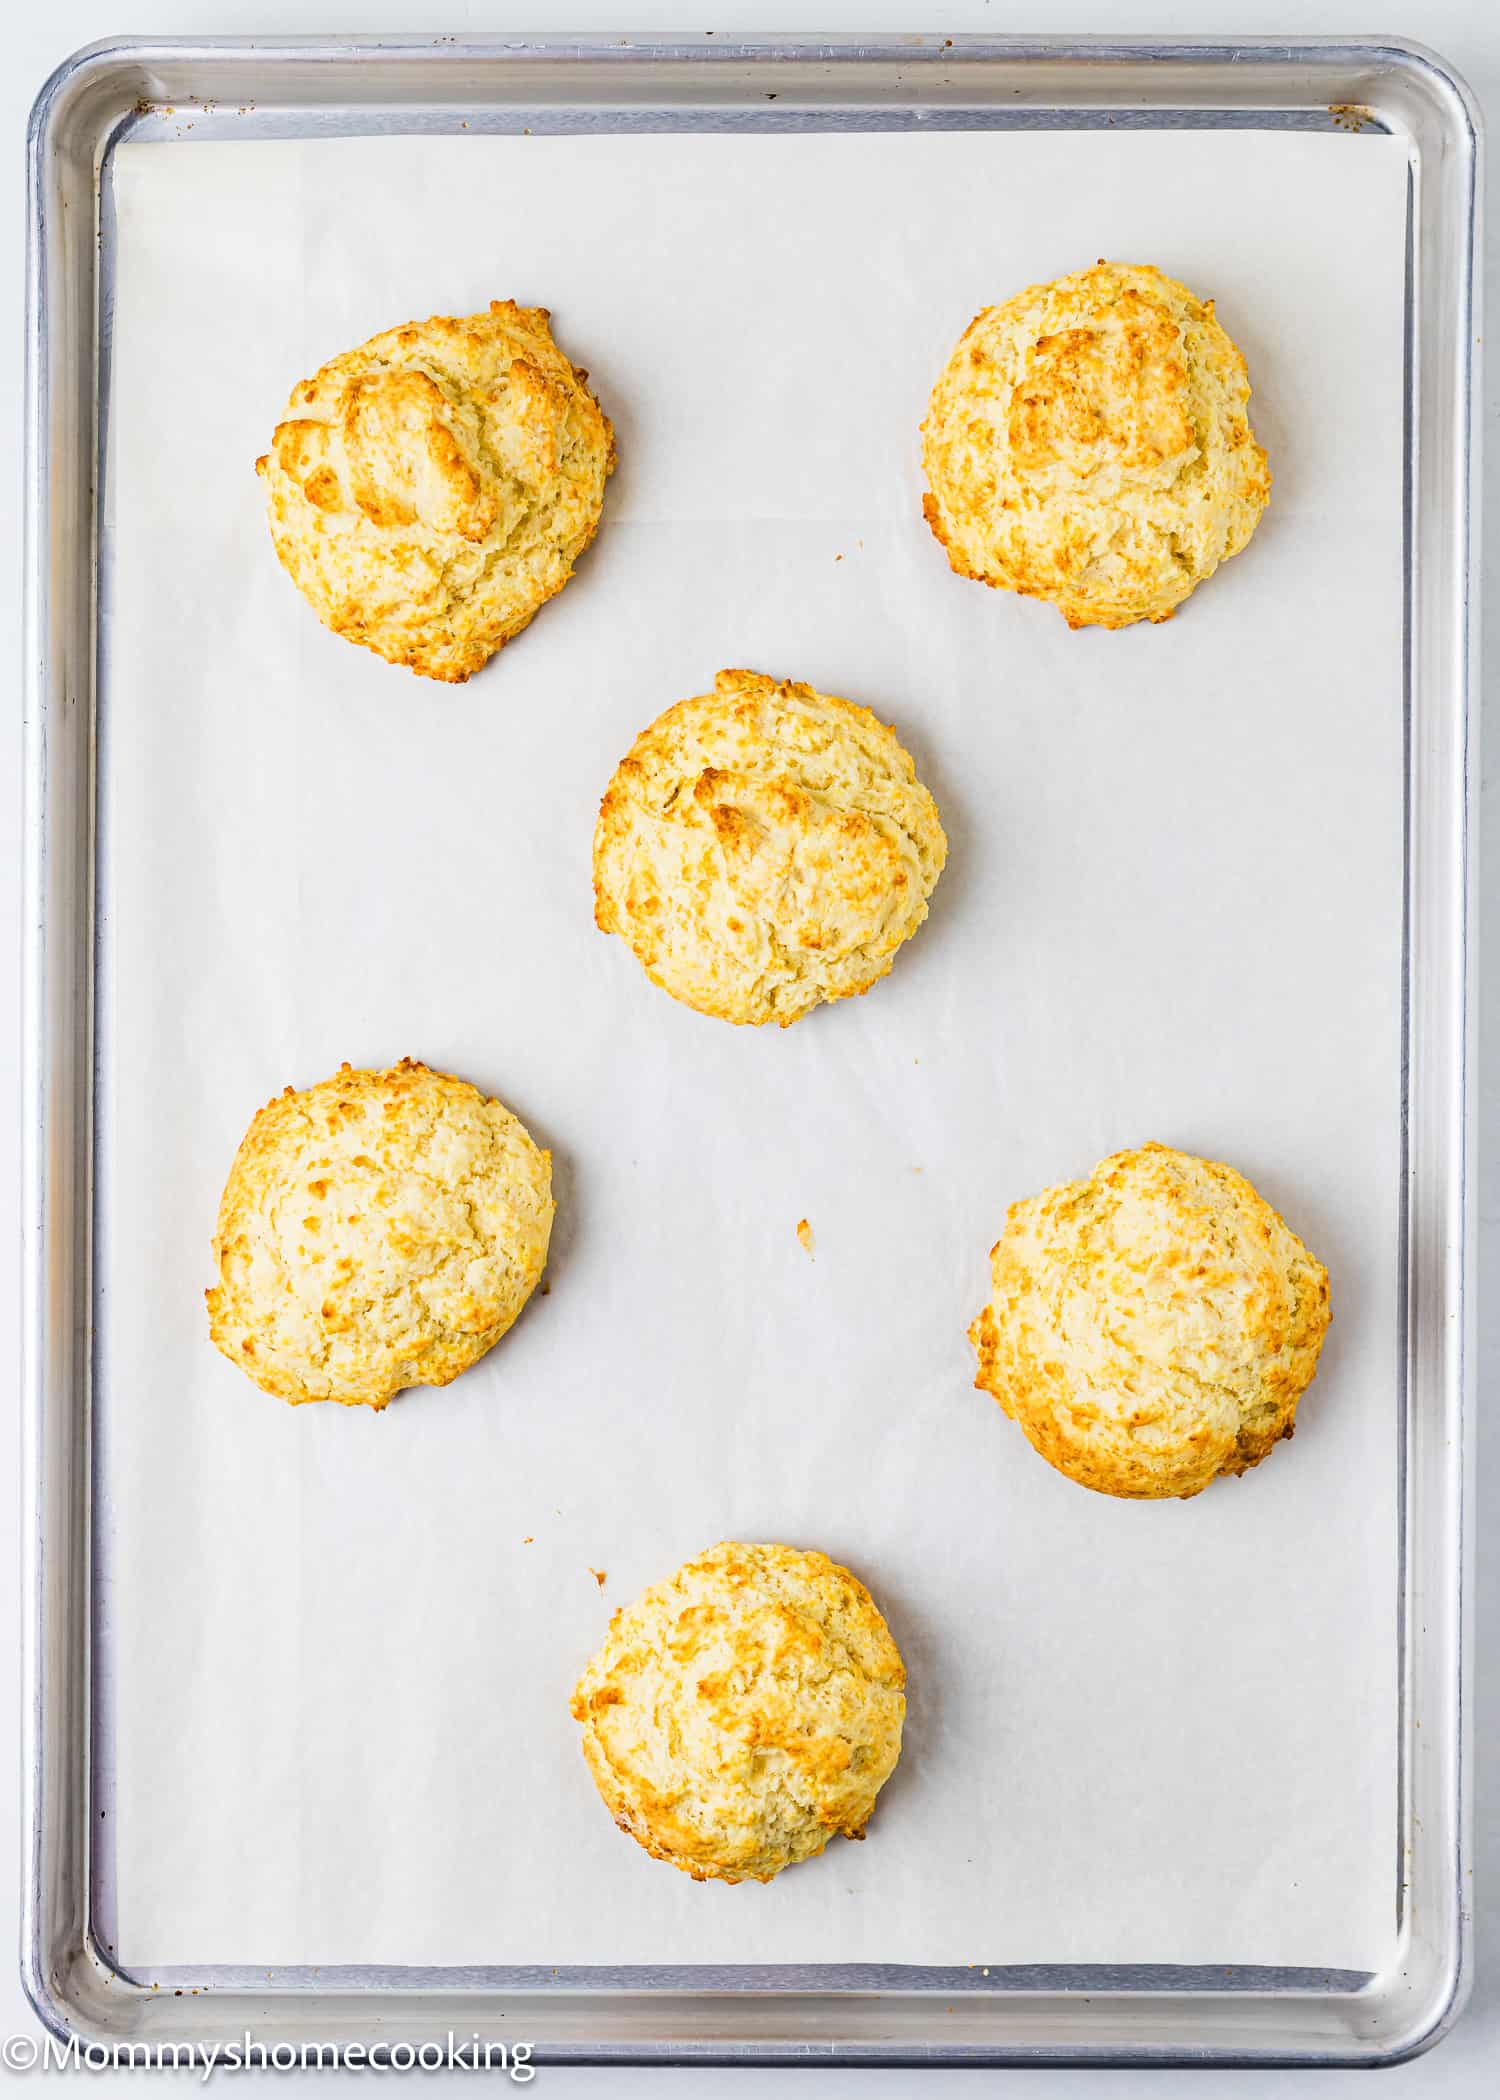 baked homemade Drop Biscuits in a baking tray.